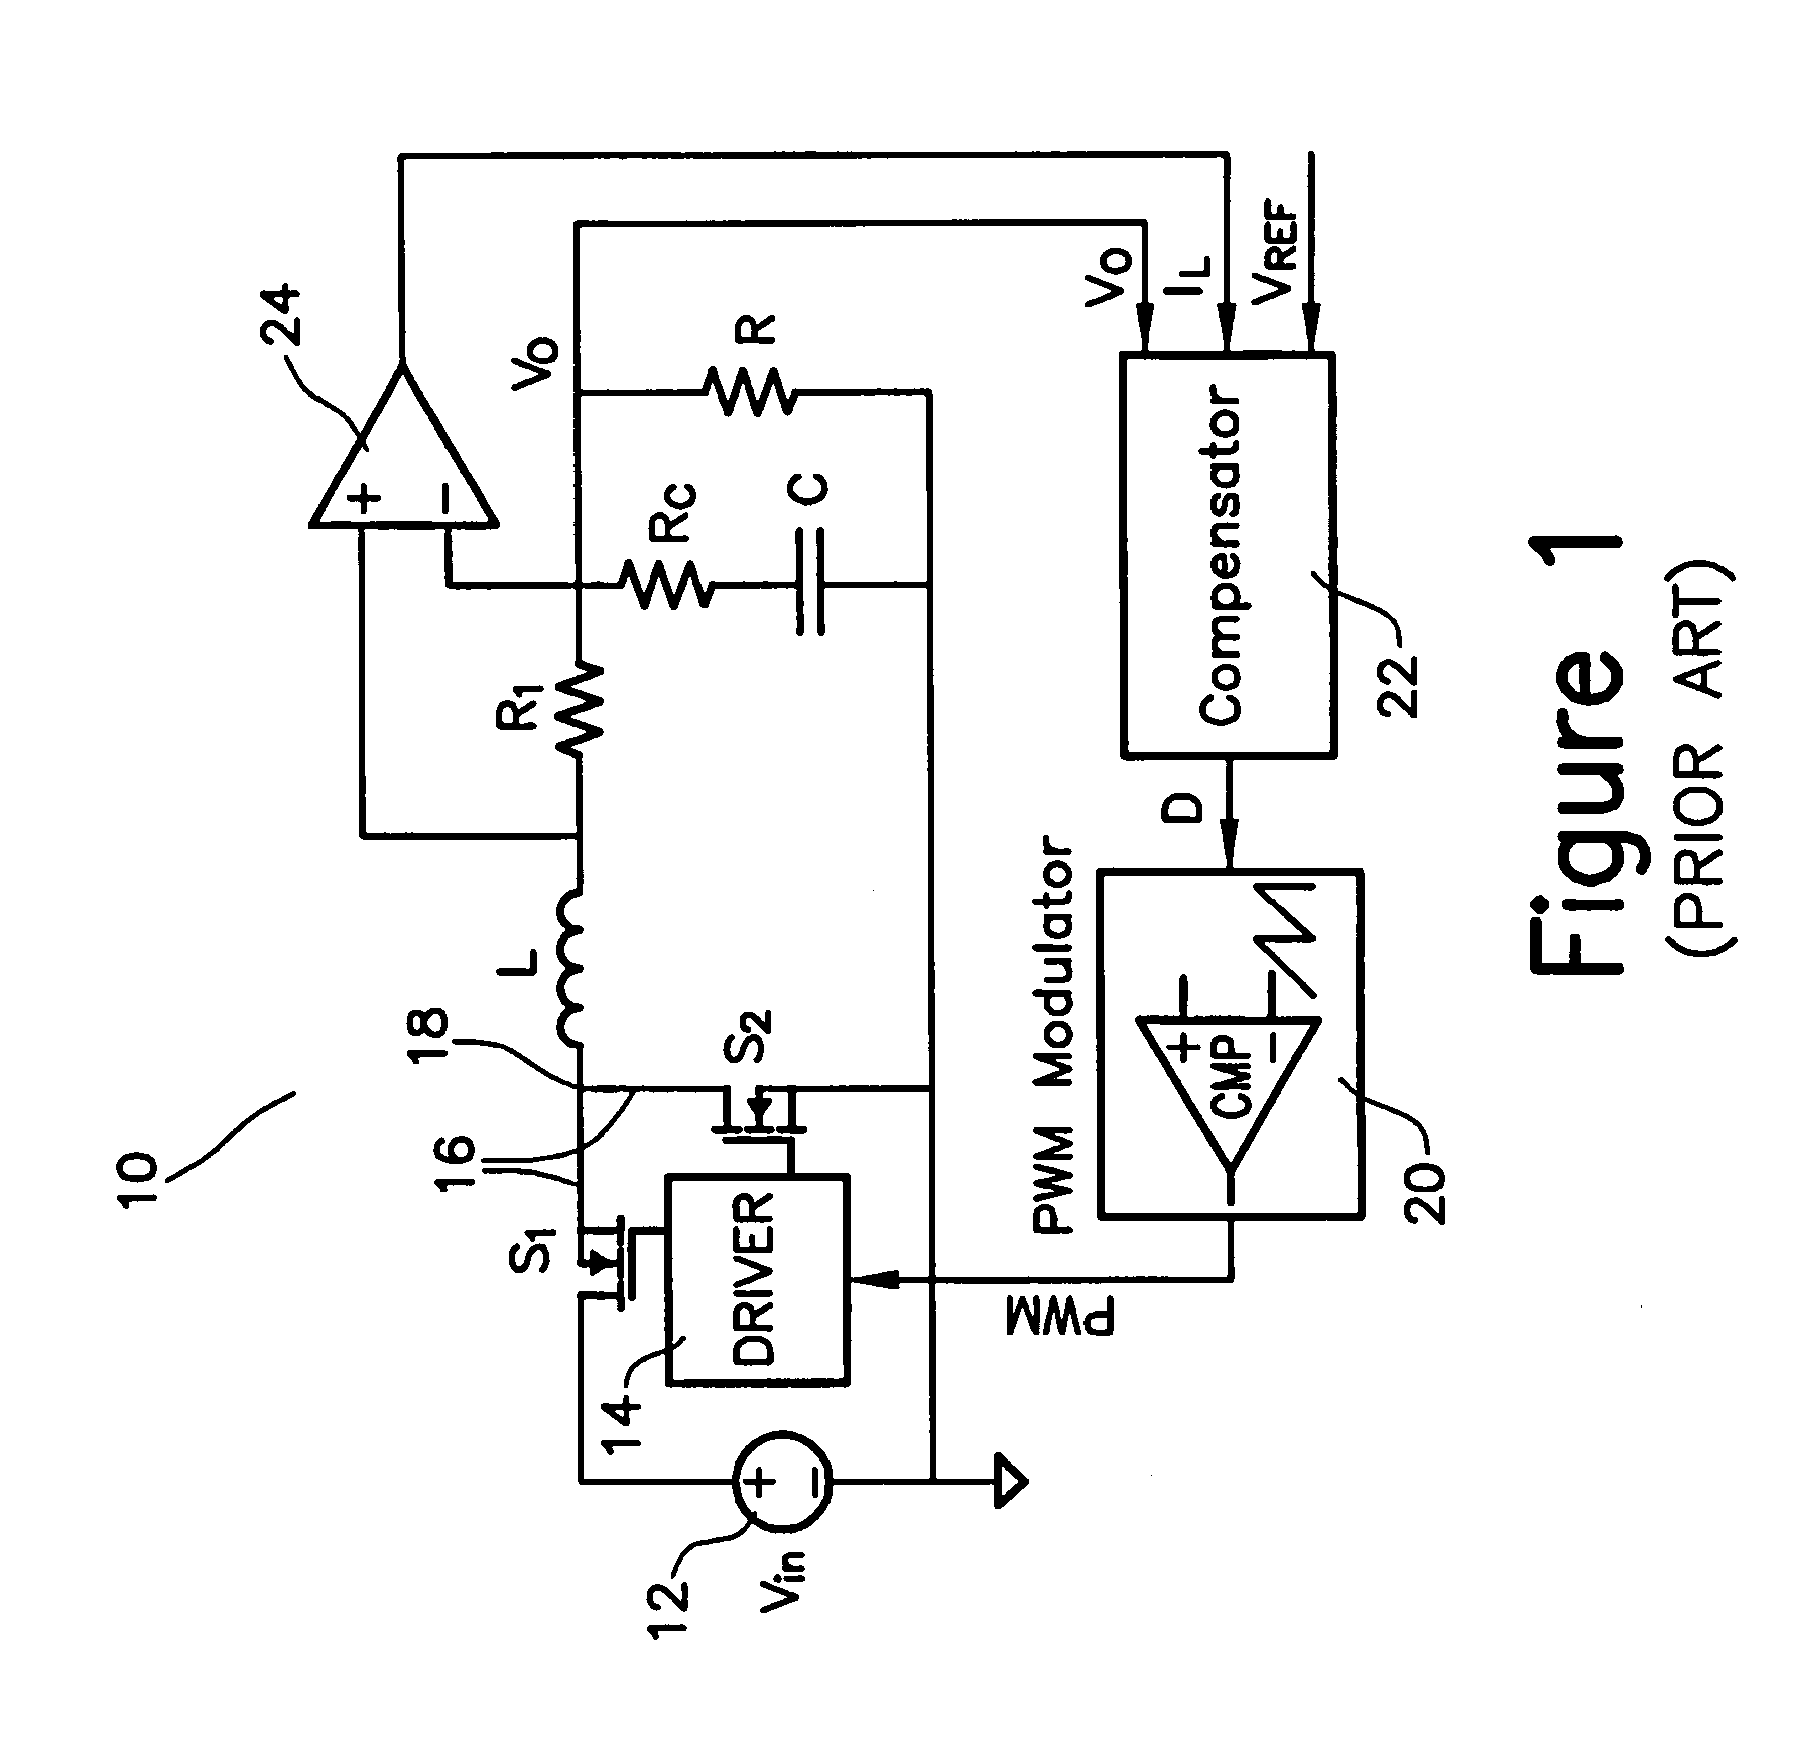 Multi-mode switching control circuit and method for improving light load efficiency in switching power supplies